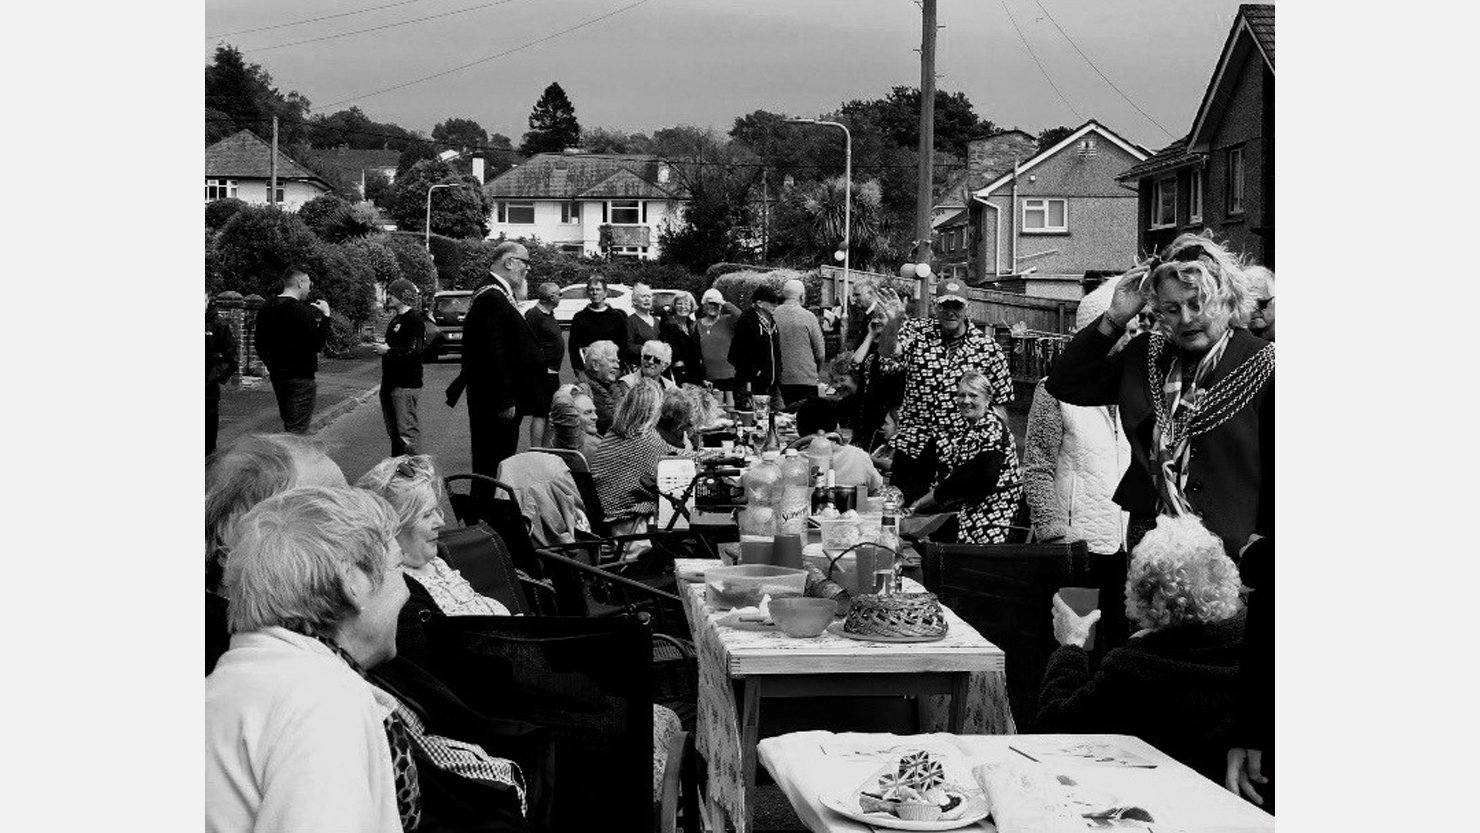 A black and white image of a group of people sat around a table at a street party enjoying food and drink